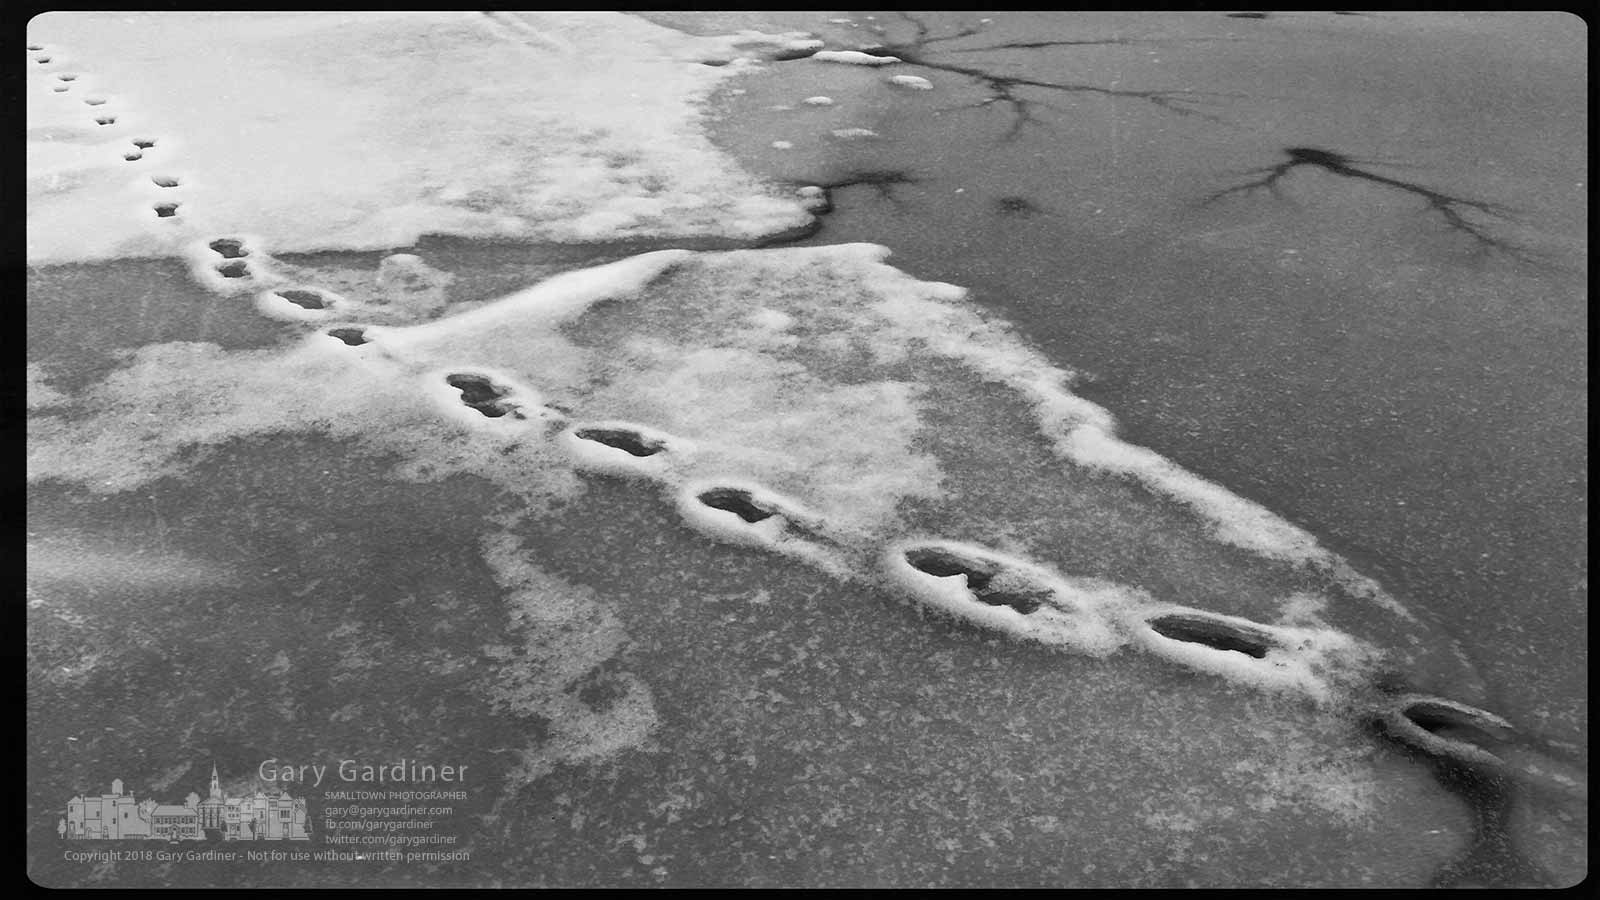 Footprints across the slushy ice covering Hoover Reservoir mark the path of danger for one walker. My Final Photo for Feb. 9, 2018.